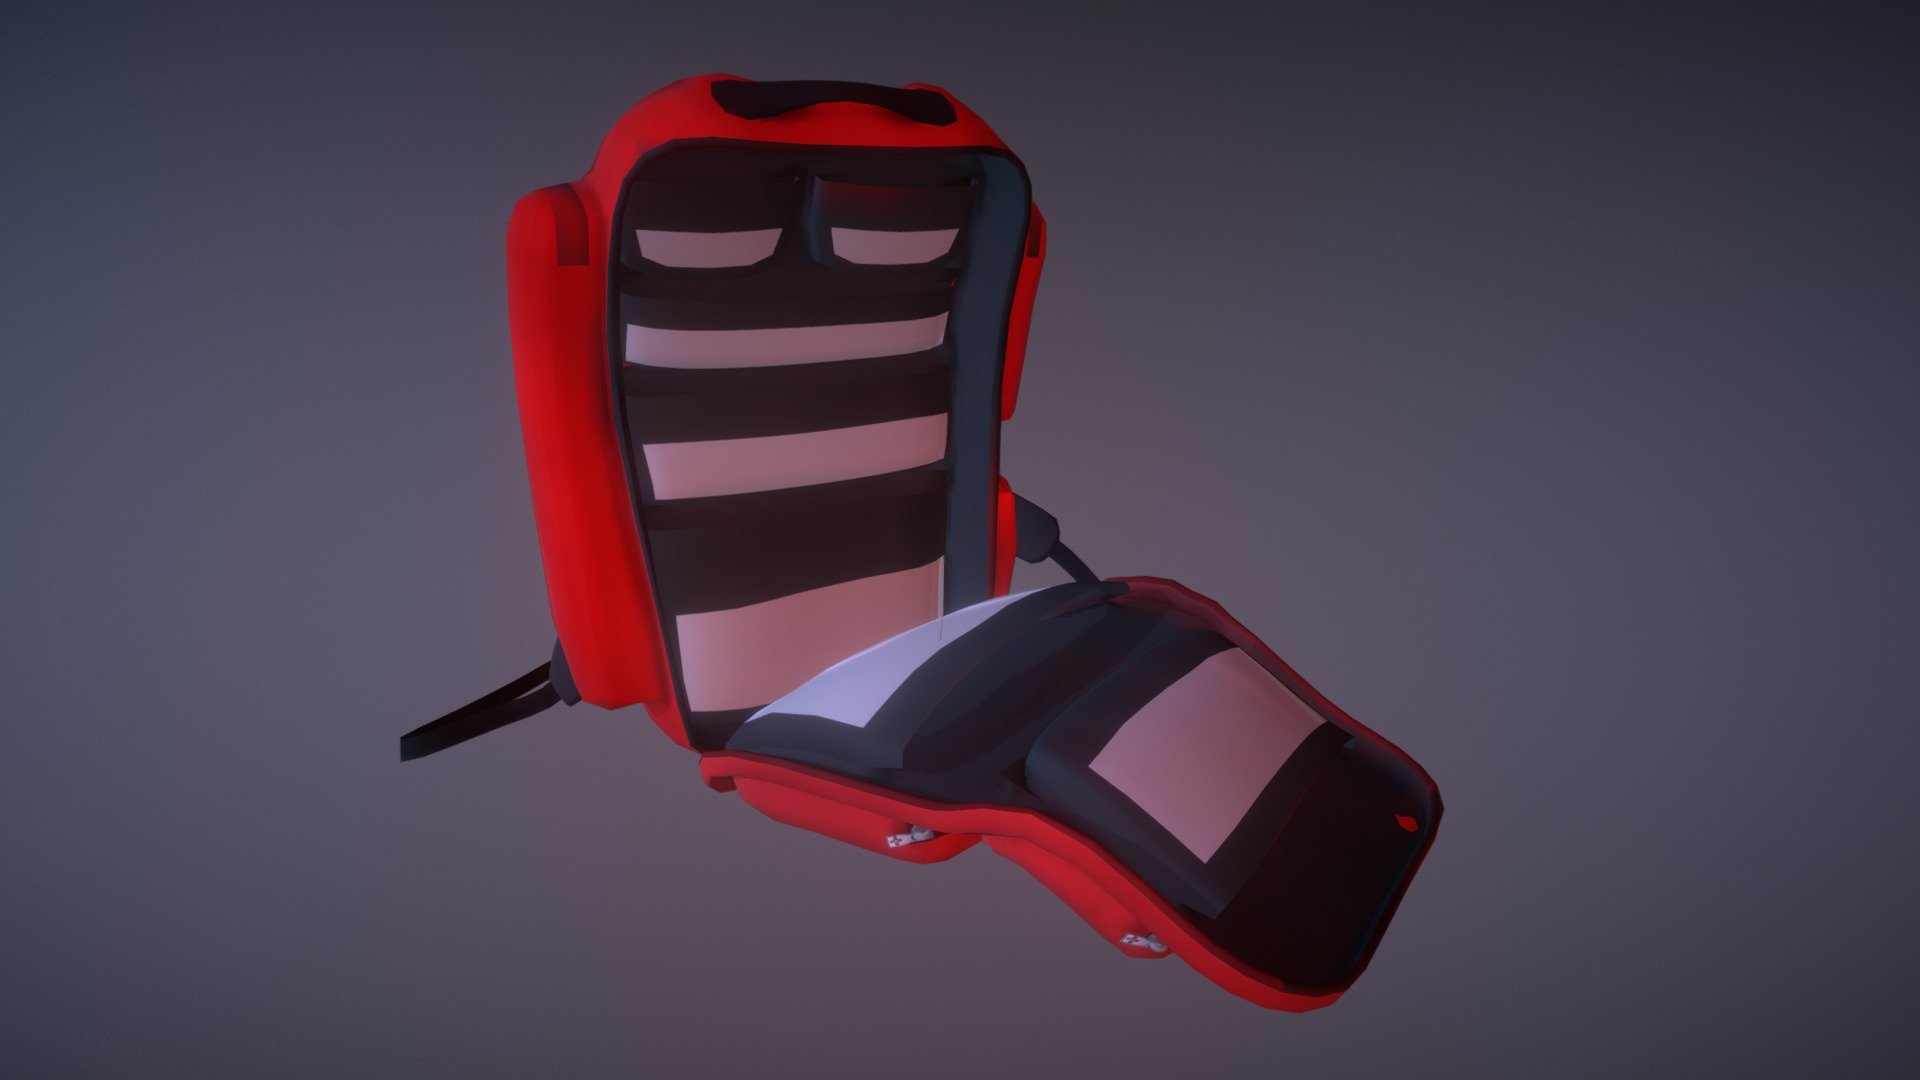 The empty shell of a paramedic backpack after attending the scene of a car crash caused by a failed escape in robbing a bank.

Created as part of the project in Studio 1 in SAE.

Modelled in Maya
Textured using Krita - ^ (HI-RES) Paramedic Backpack - 3D model by Marc Humphreys 3D (@mh3d) 3d model